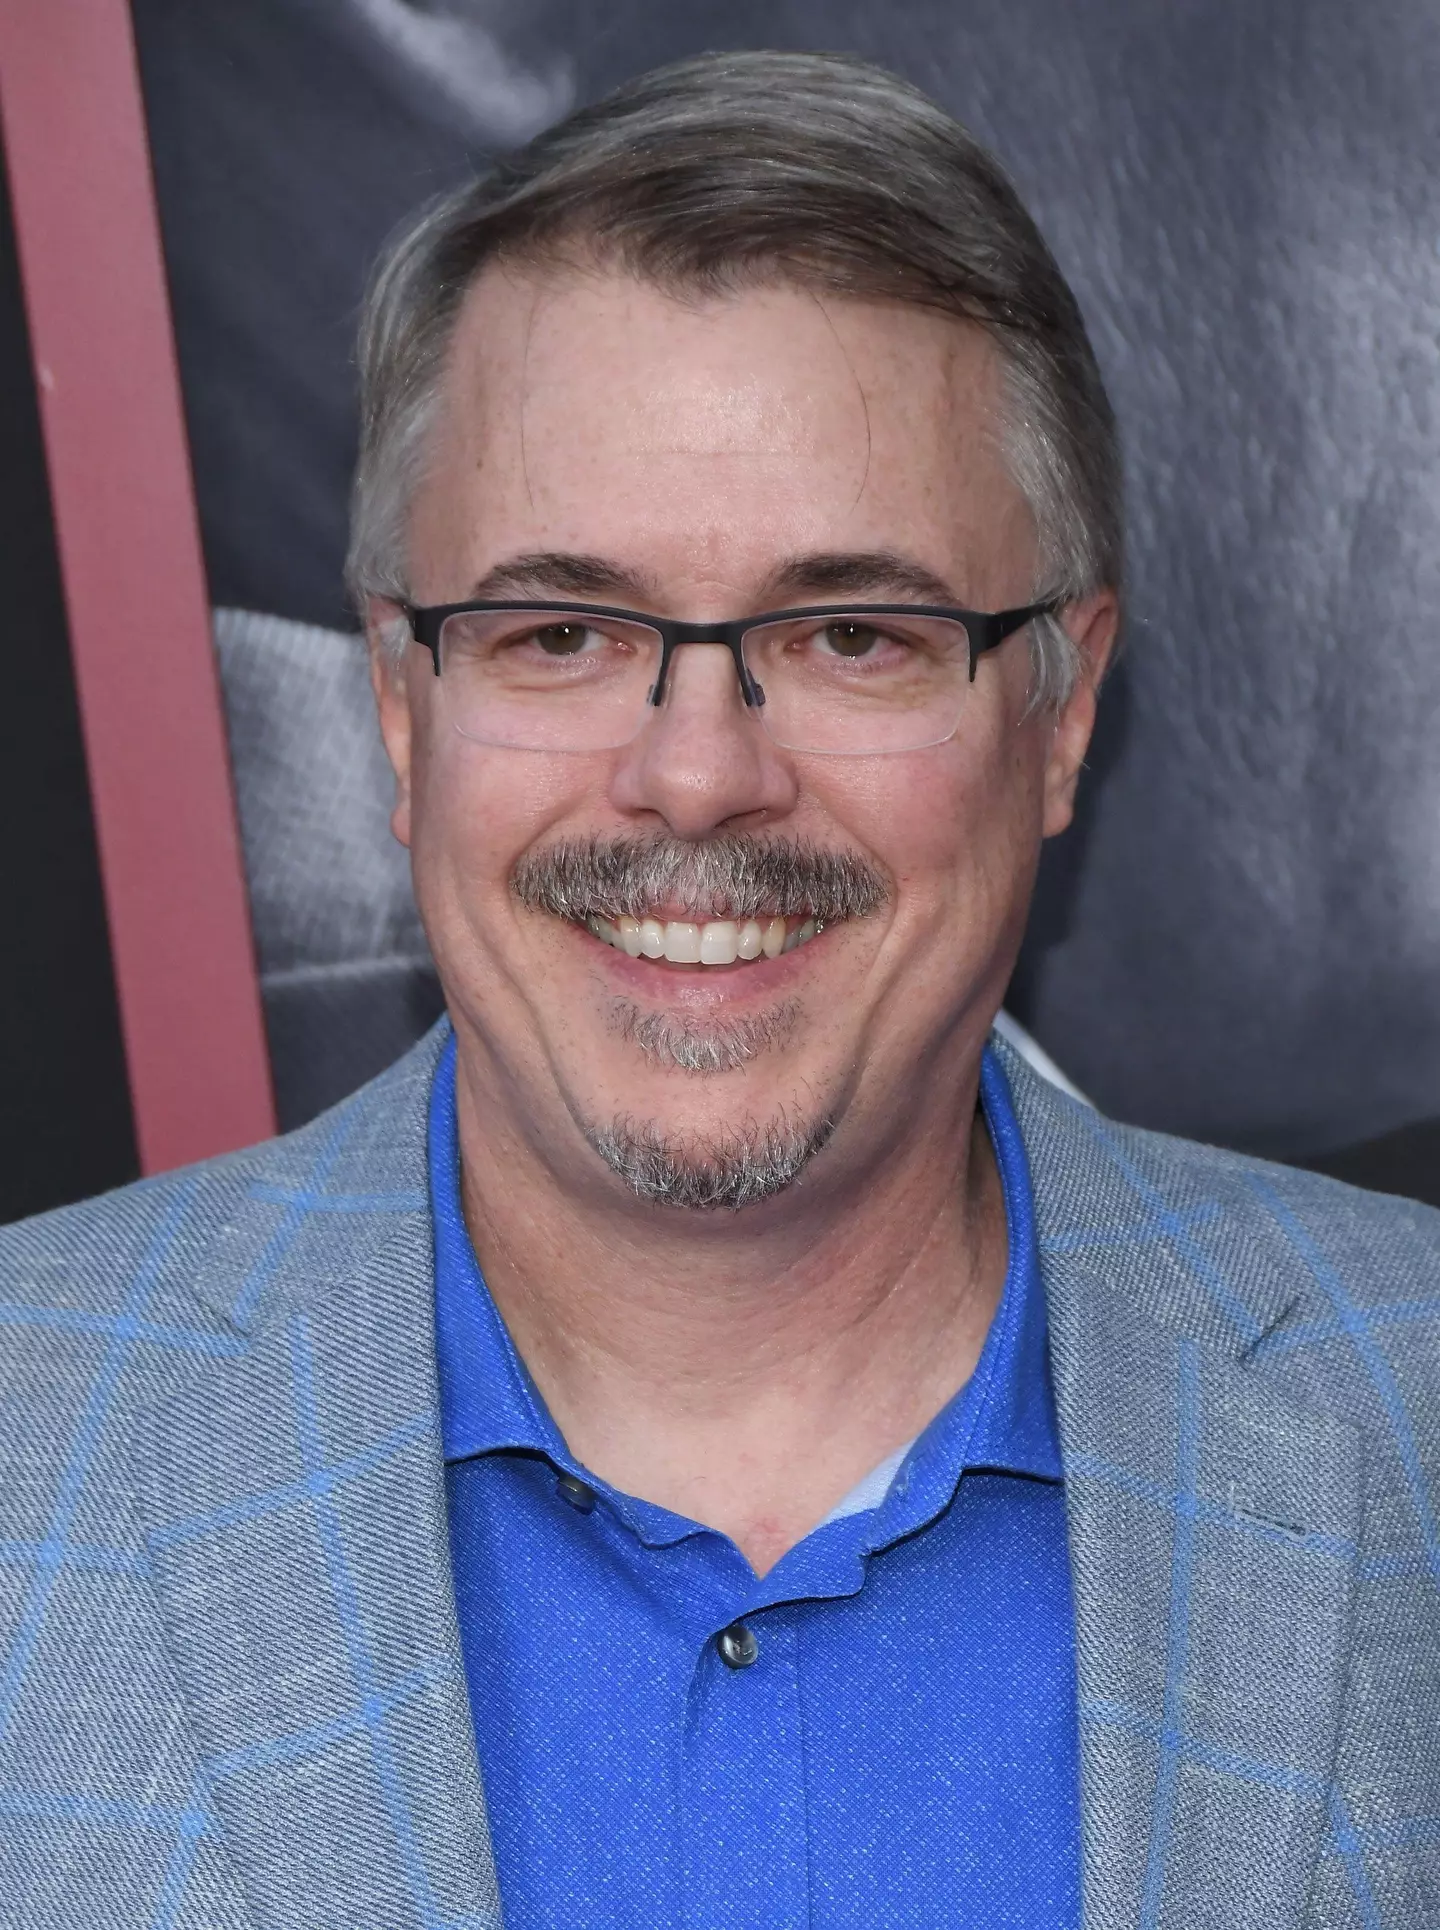 Vince Gilligan at the premiere of Better Call Saul.